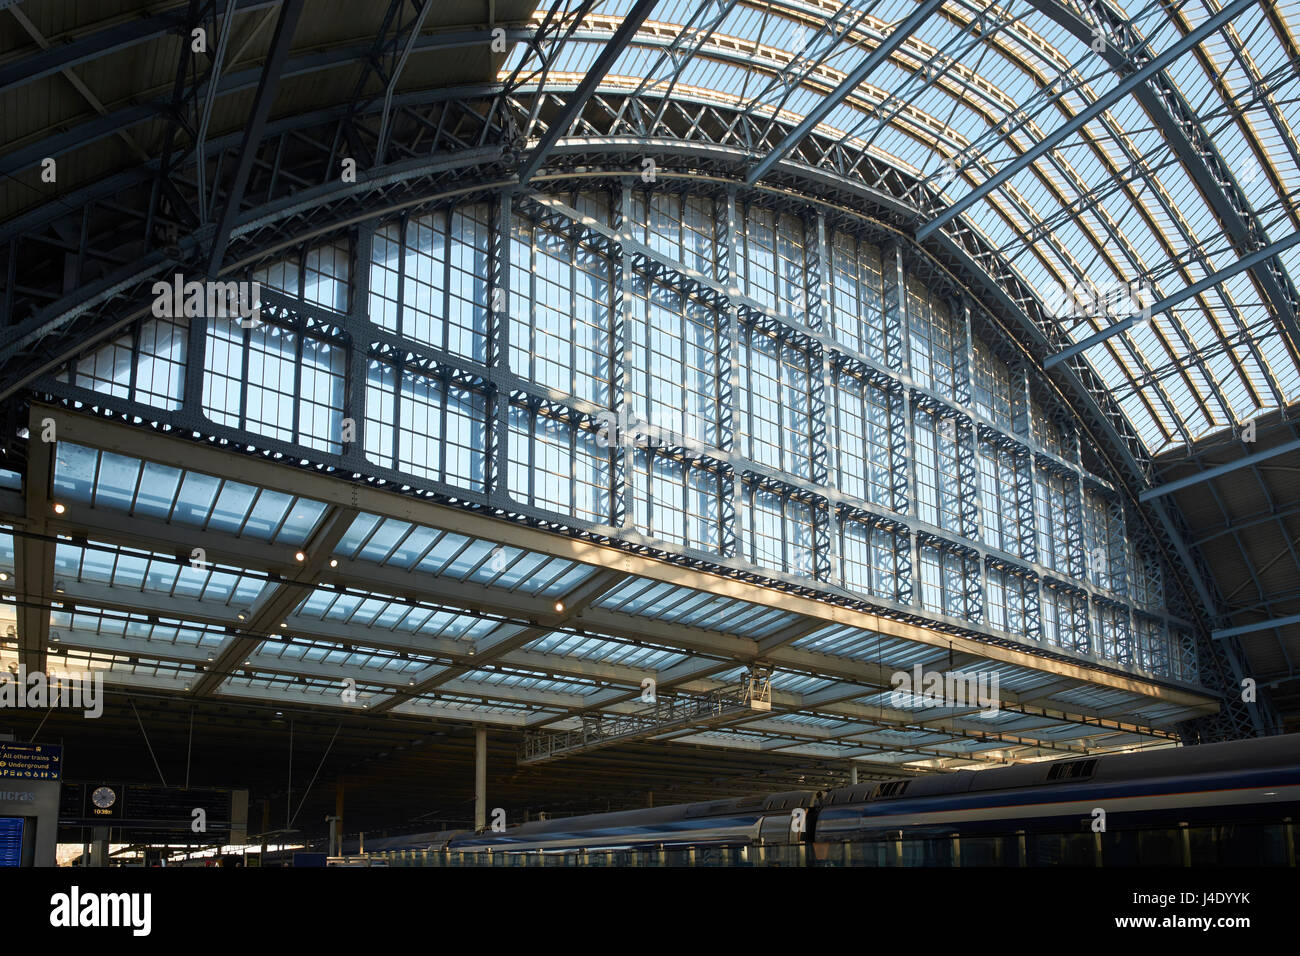 St Pancras Station, London. The trainshed, designed by William Barlow for the Midland Railway in the 1860s. Northern gable end. Stock Photo